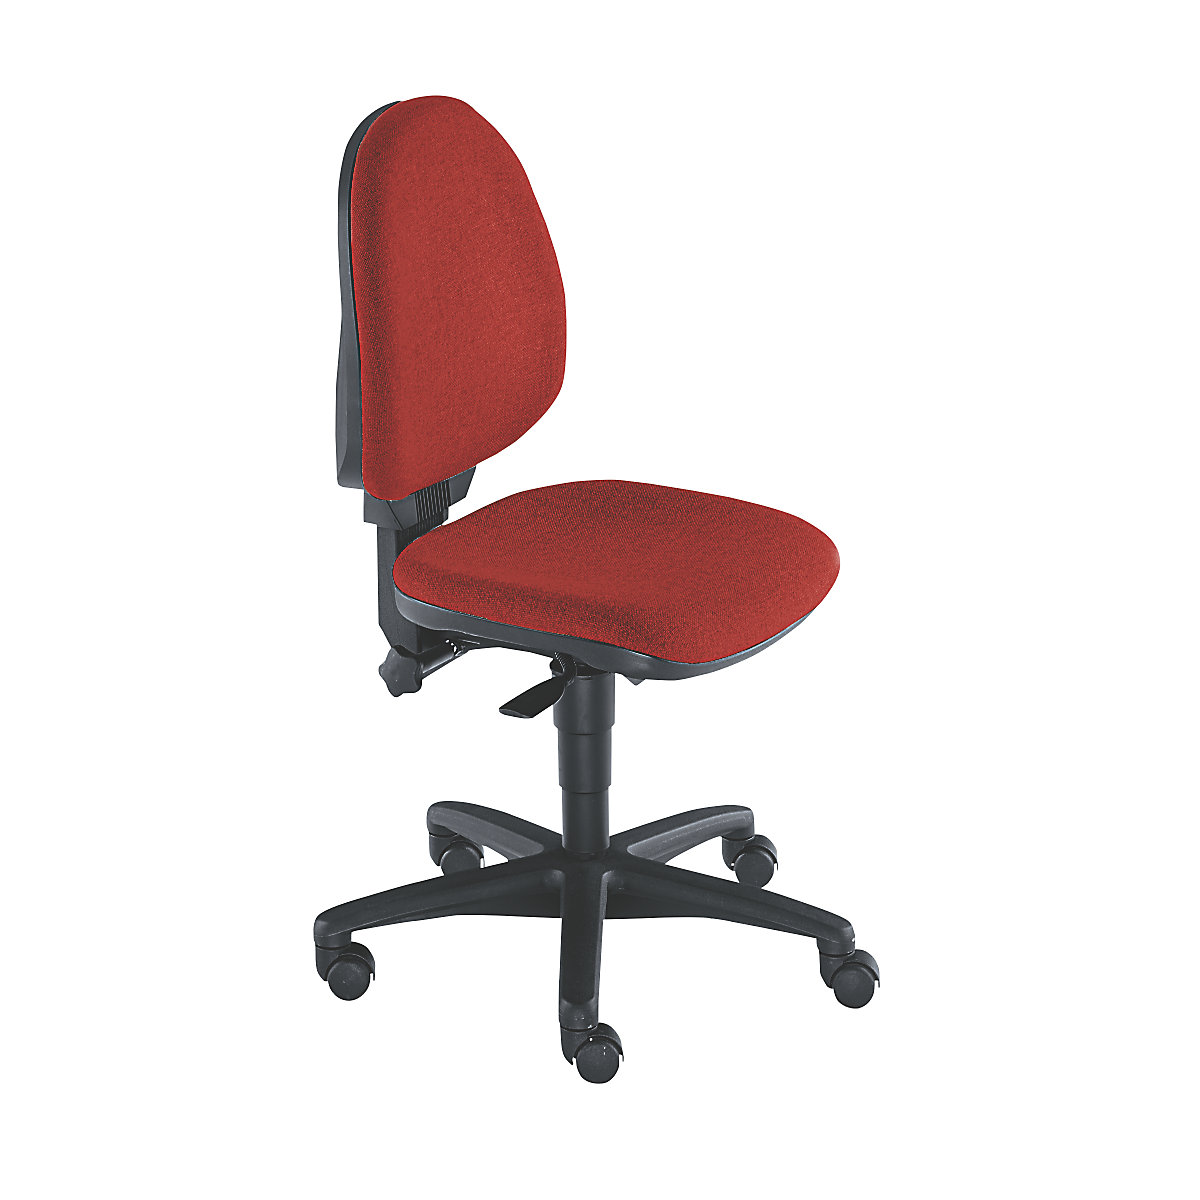 Standard swivel chair – Topstar, without arm rests, back rest 450 mm, red fabric, black frame, 2 +-4